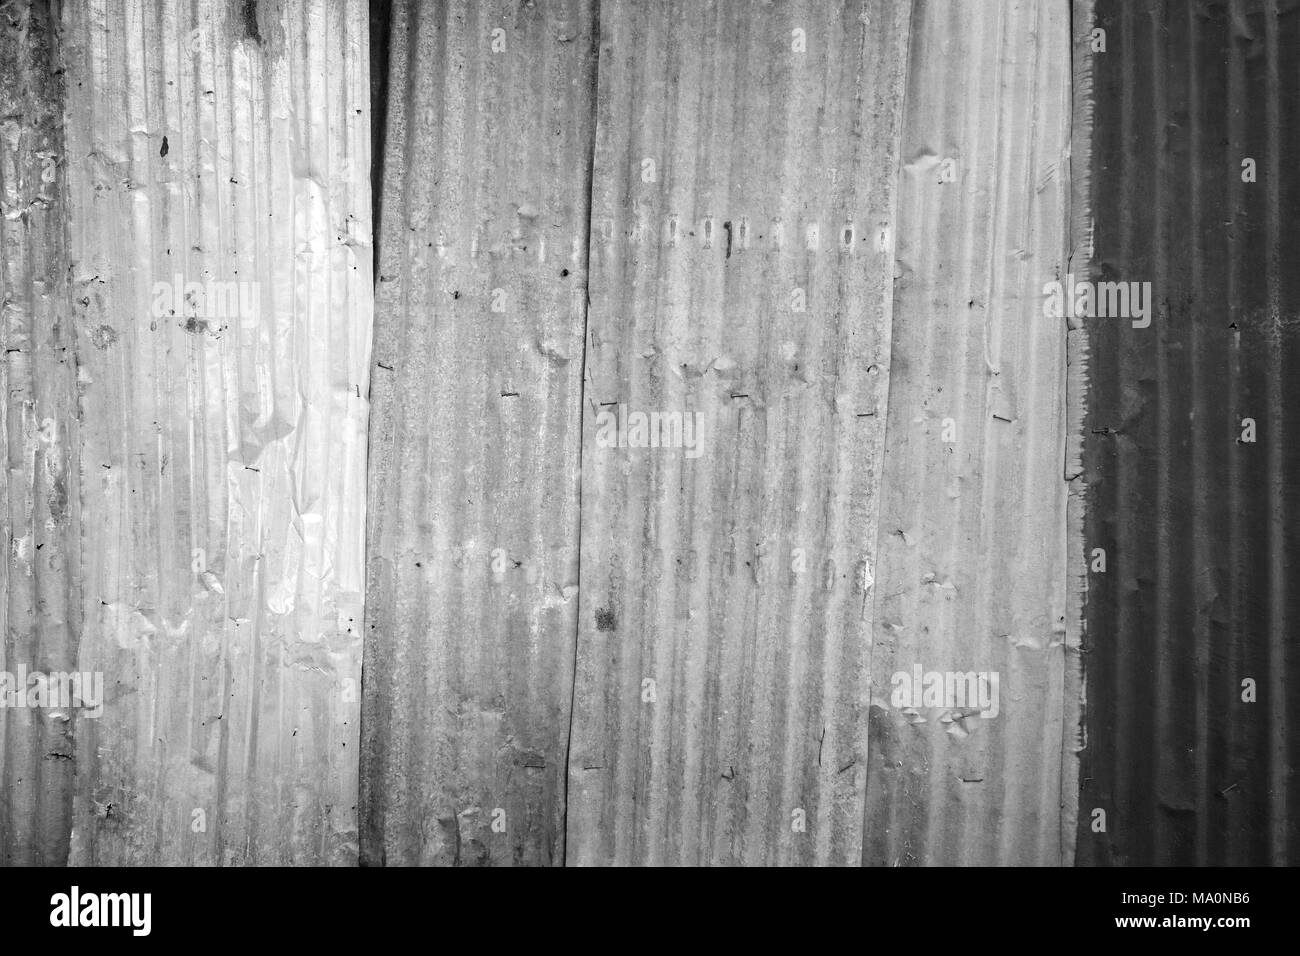 Rusty and corrugated iron metal construction site wall texture background with vignette in black and white. Stock Photo